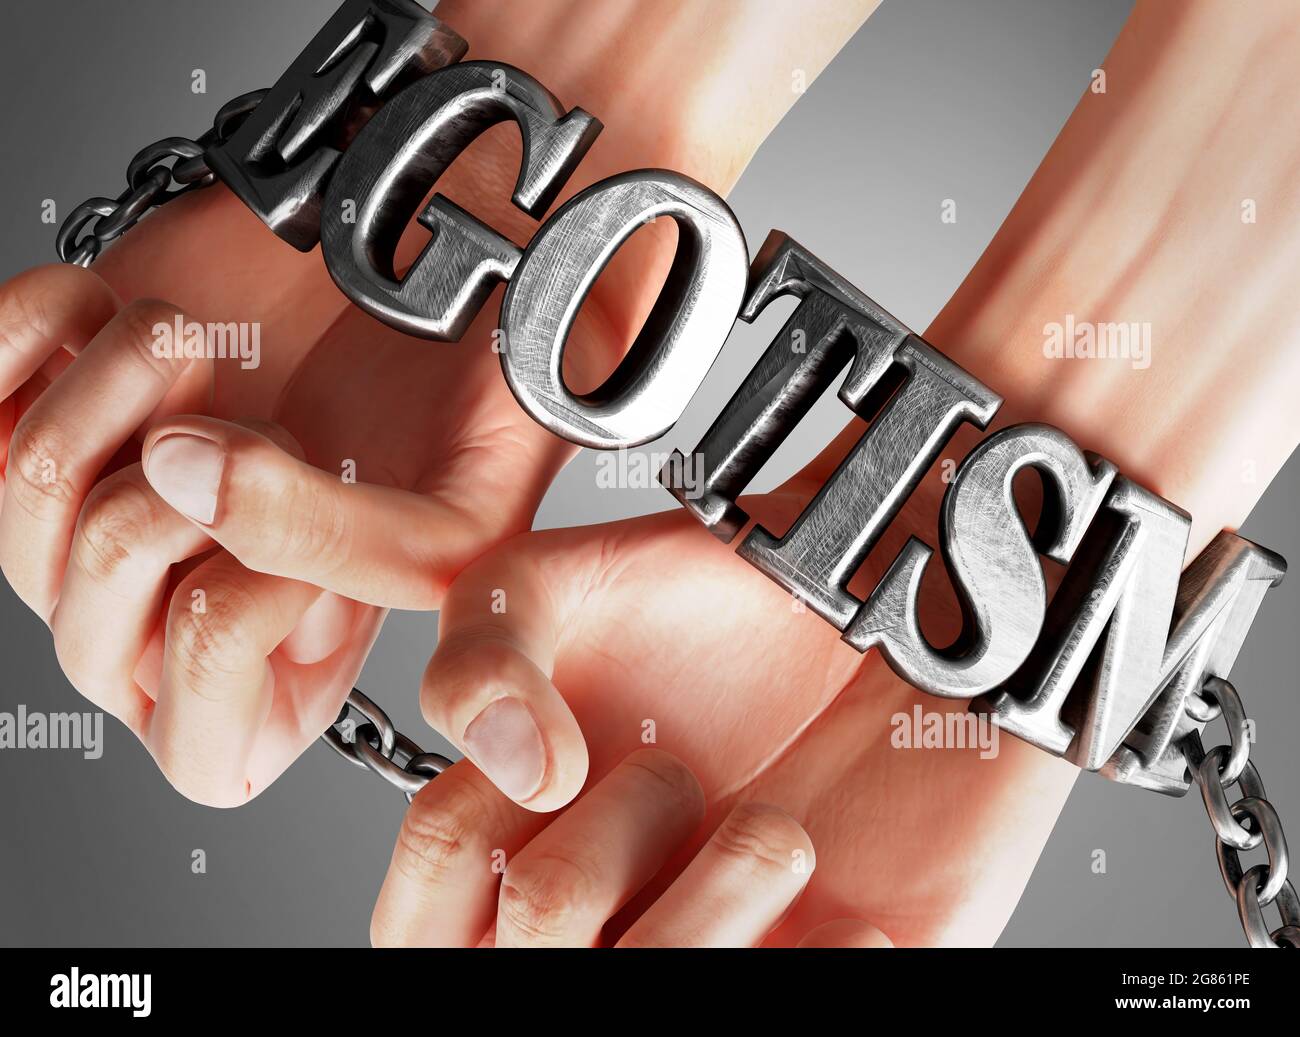 Egotism restricting life and freedom, bringing enslavement, pain and misery to human life - symbolized by chains and shackles made of metal word Egoti Stock Photo